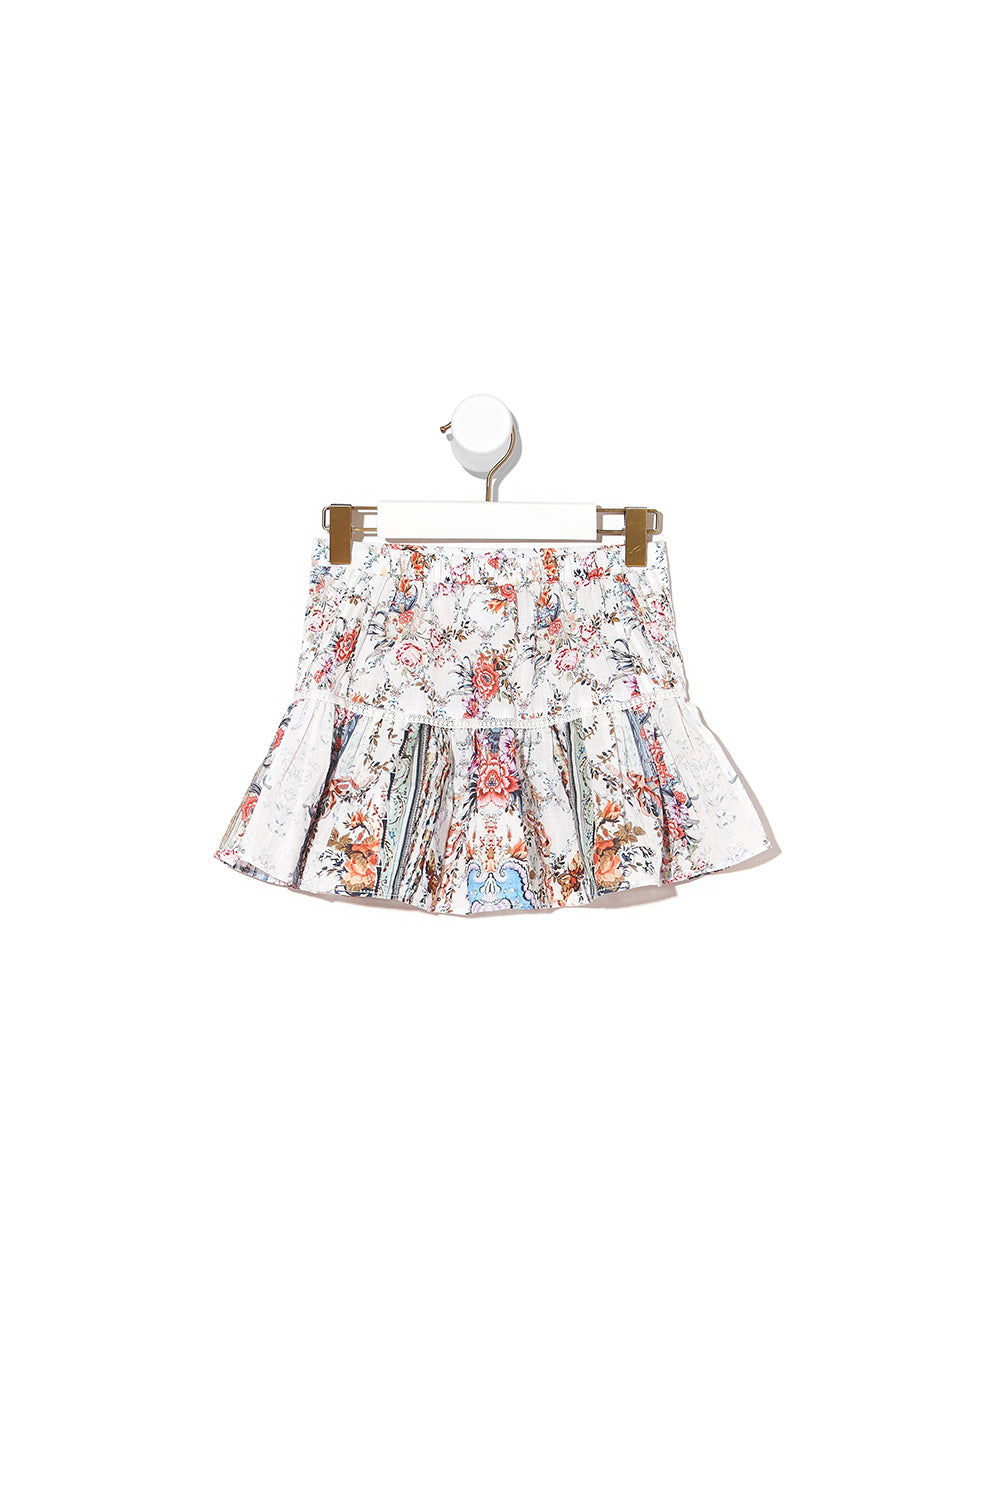 KIDS SKIRT WITH PINTUCKING SOUTHERN BELLE